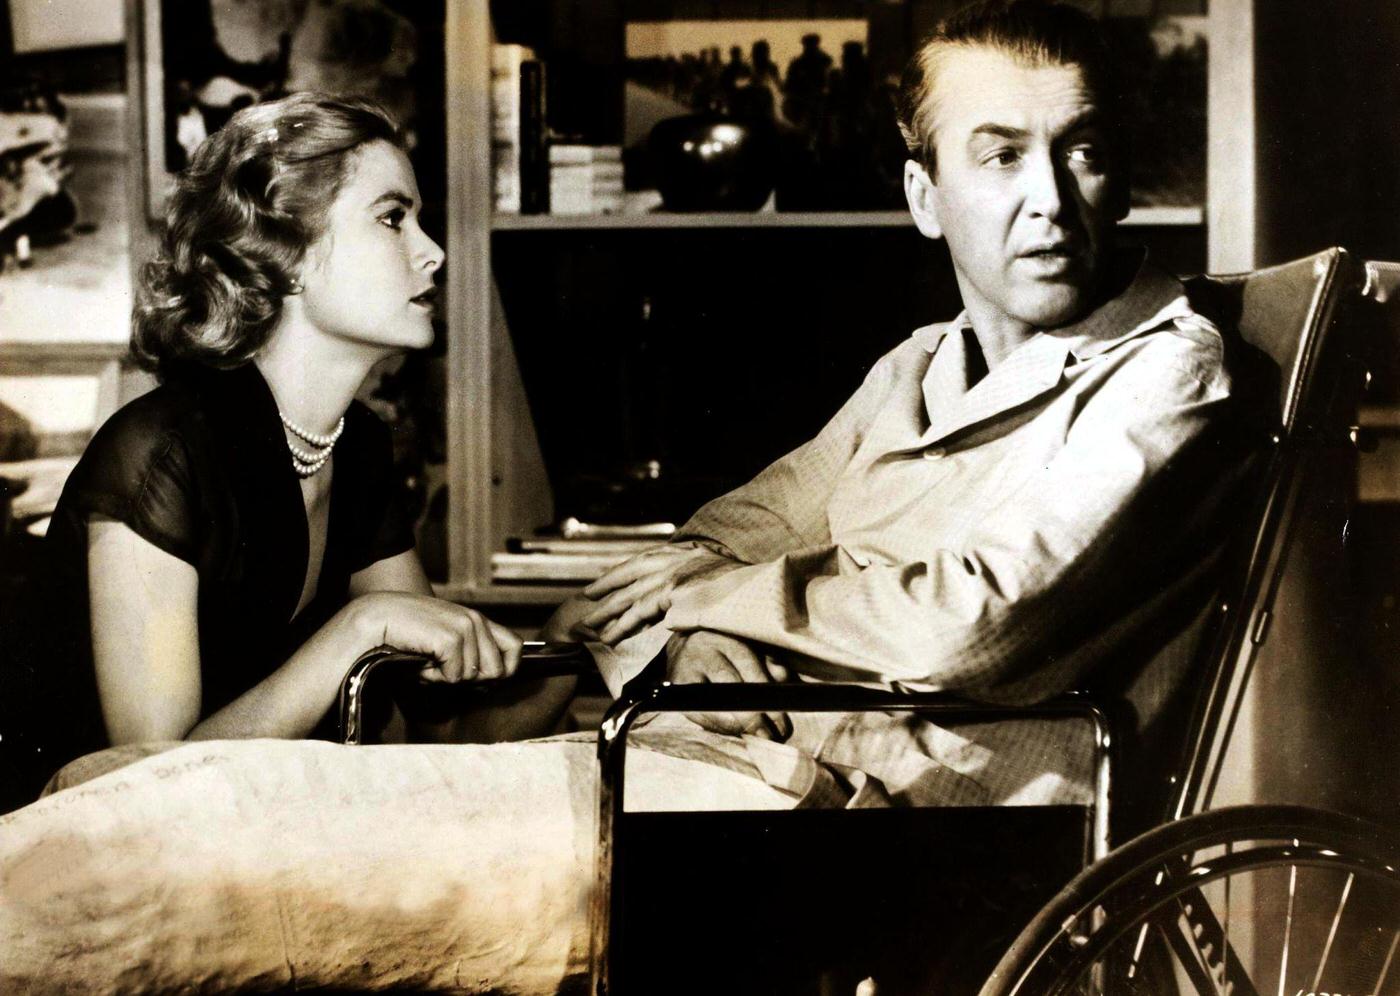 James Stewart and Grace Kelly in a still from the Alfred Hitchcock classic film "Rear Window", 1954